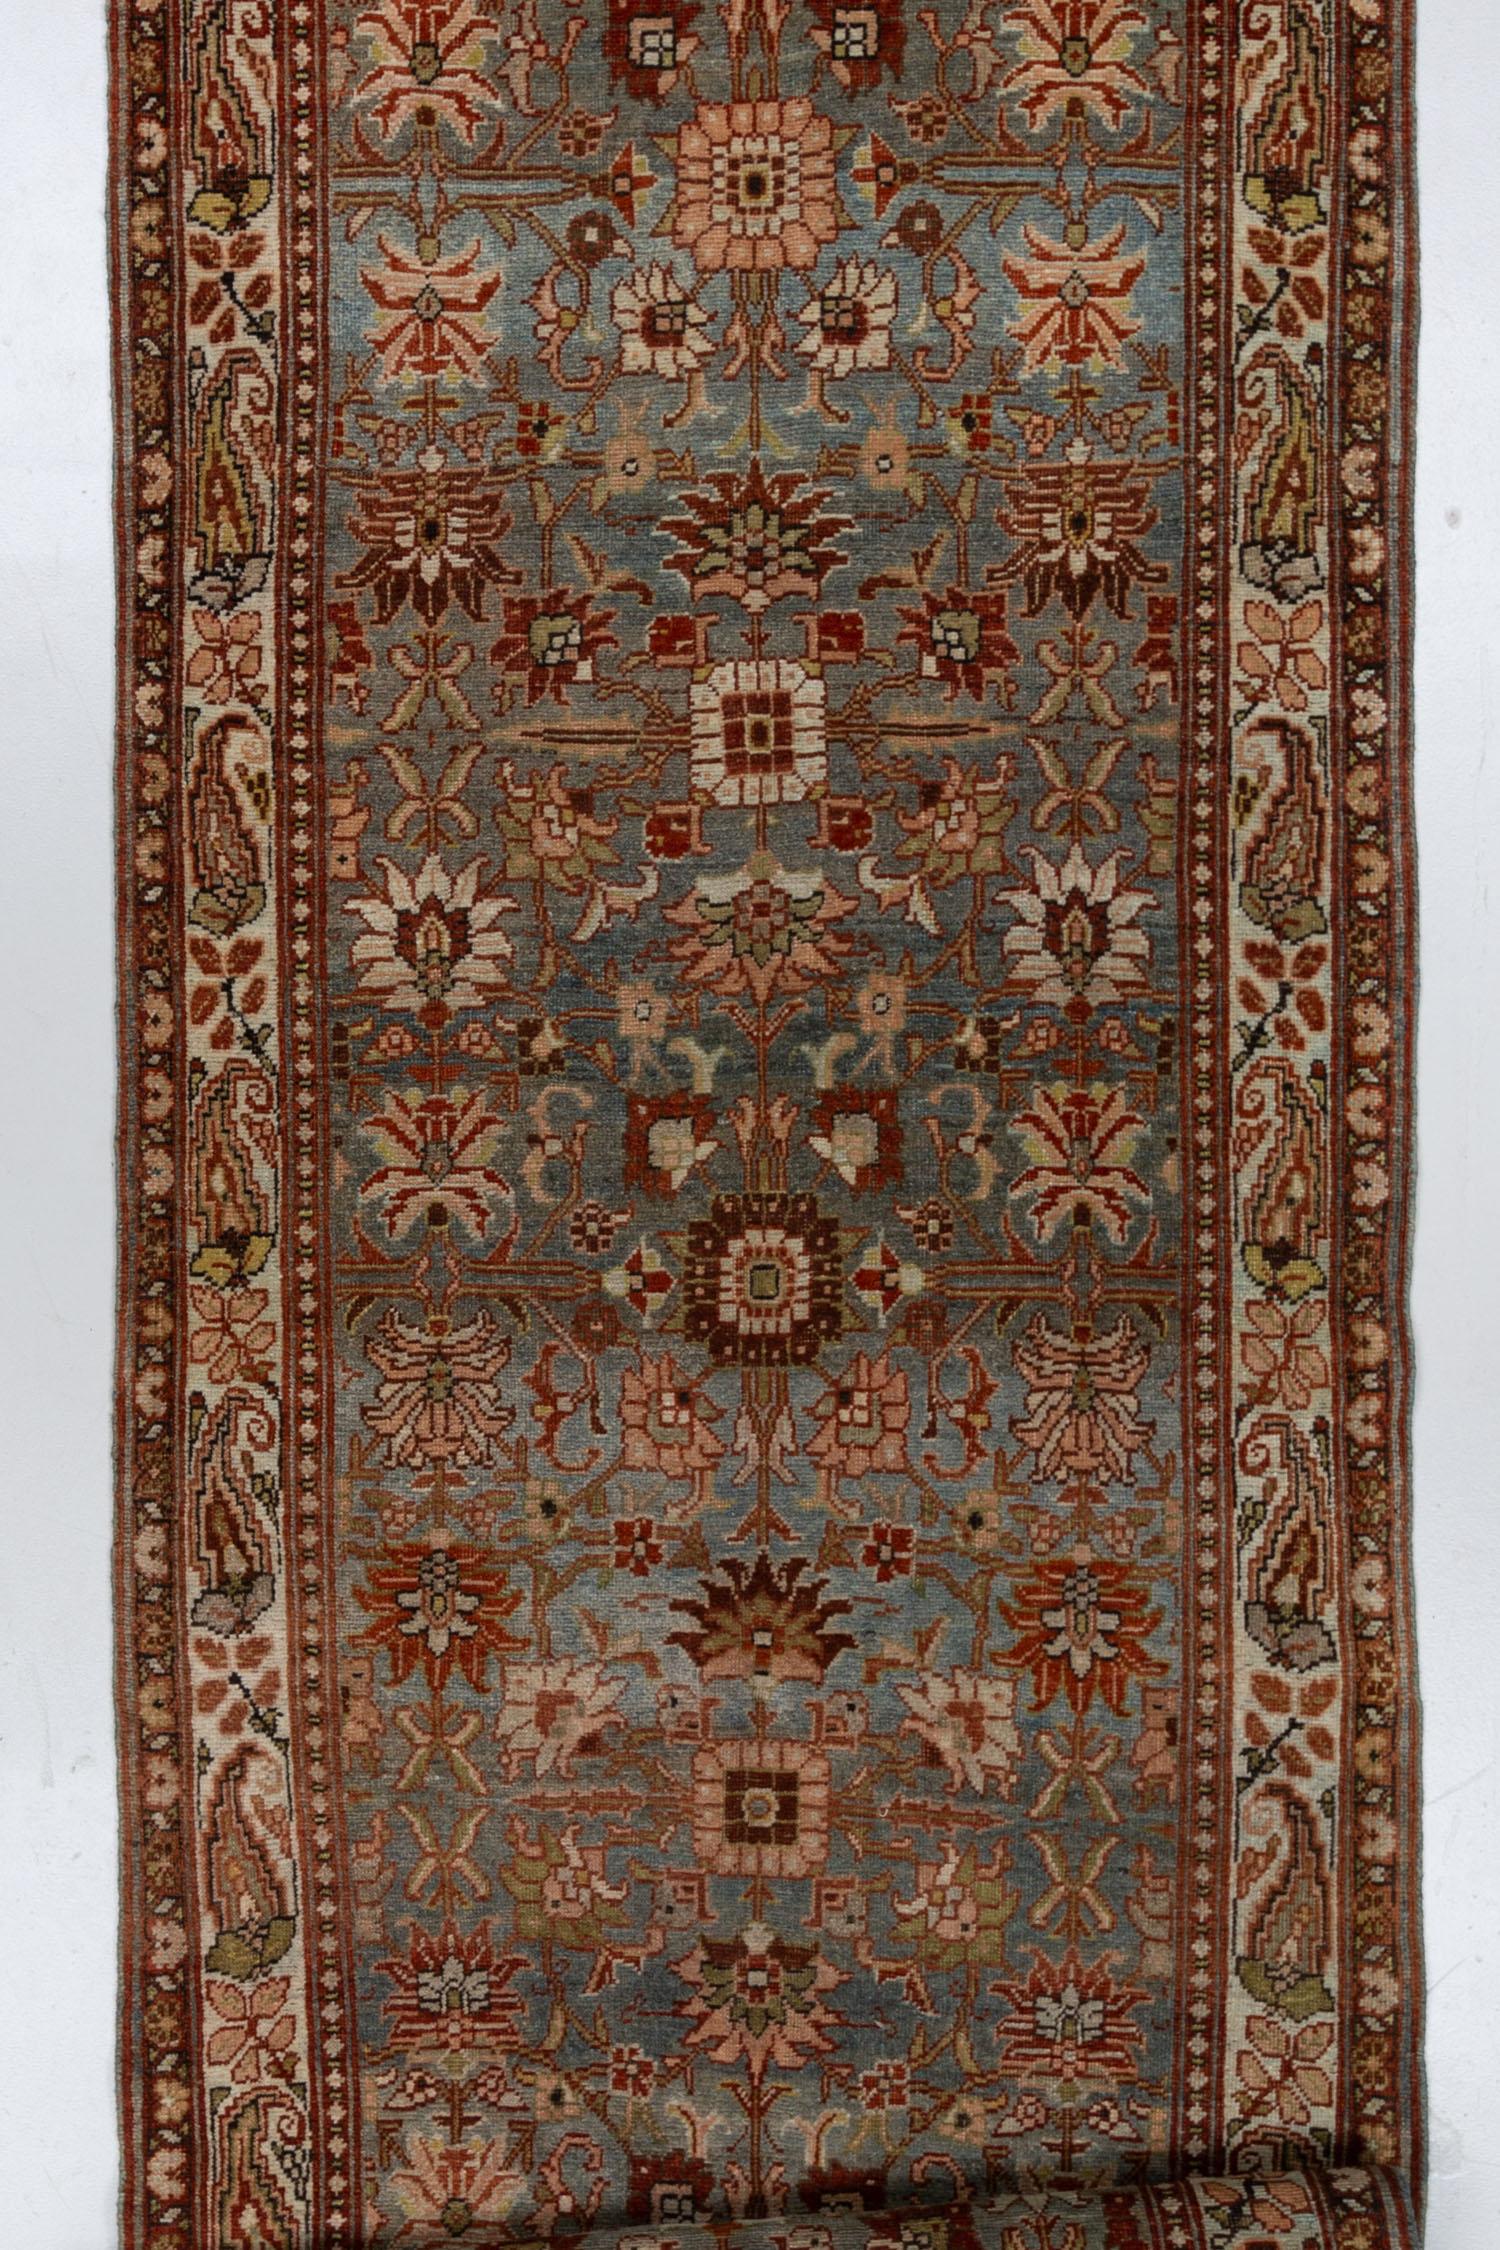 Discover the exquisite artistry of this 120 year old Persian Bidjar runner, a rare gem in both design and dimensions. The Bidjar rug, already renowned for its rarity, is uniquely presented in this unusual runner size, making it a standout addition